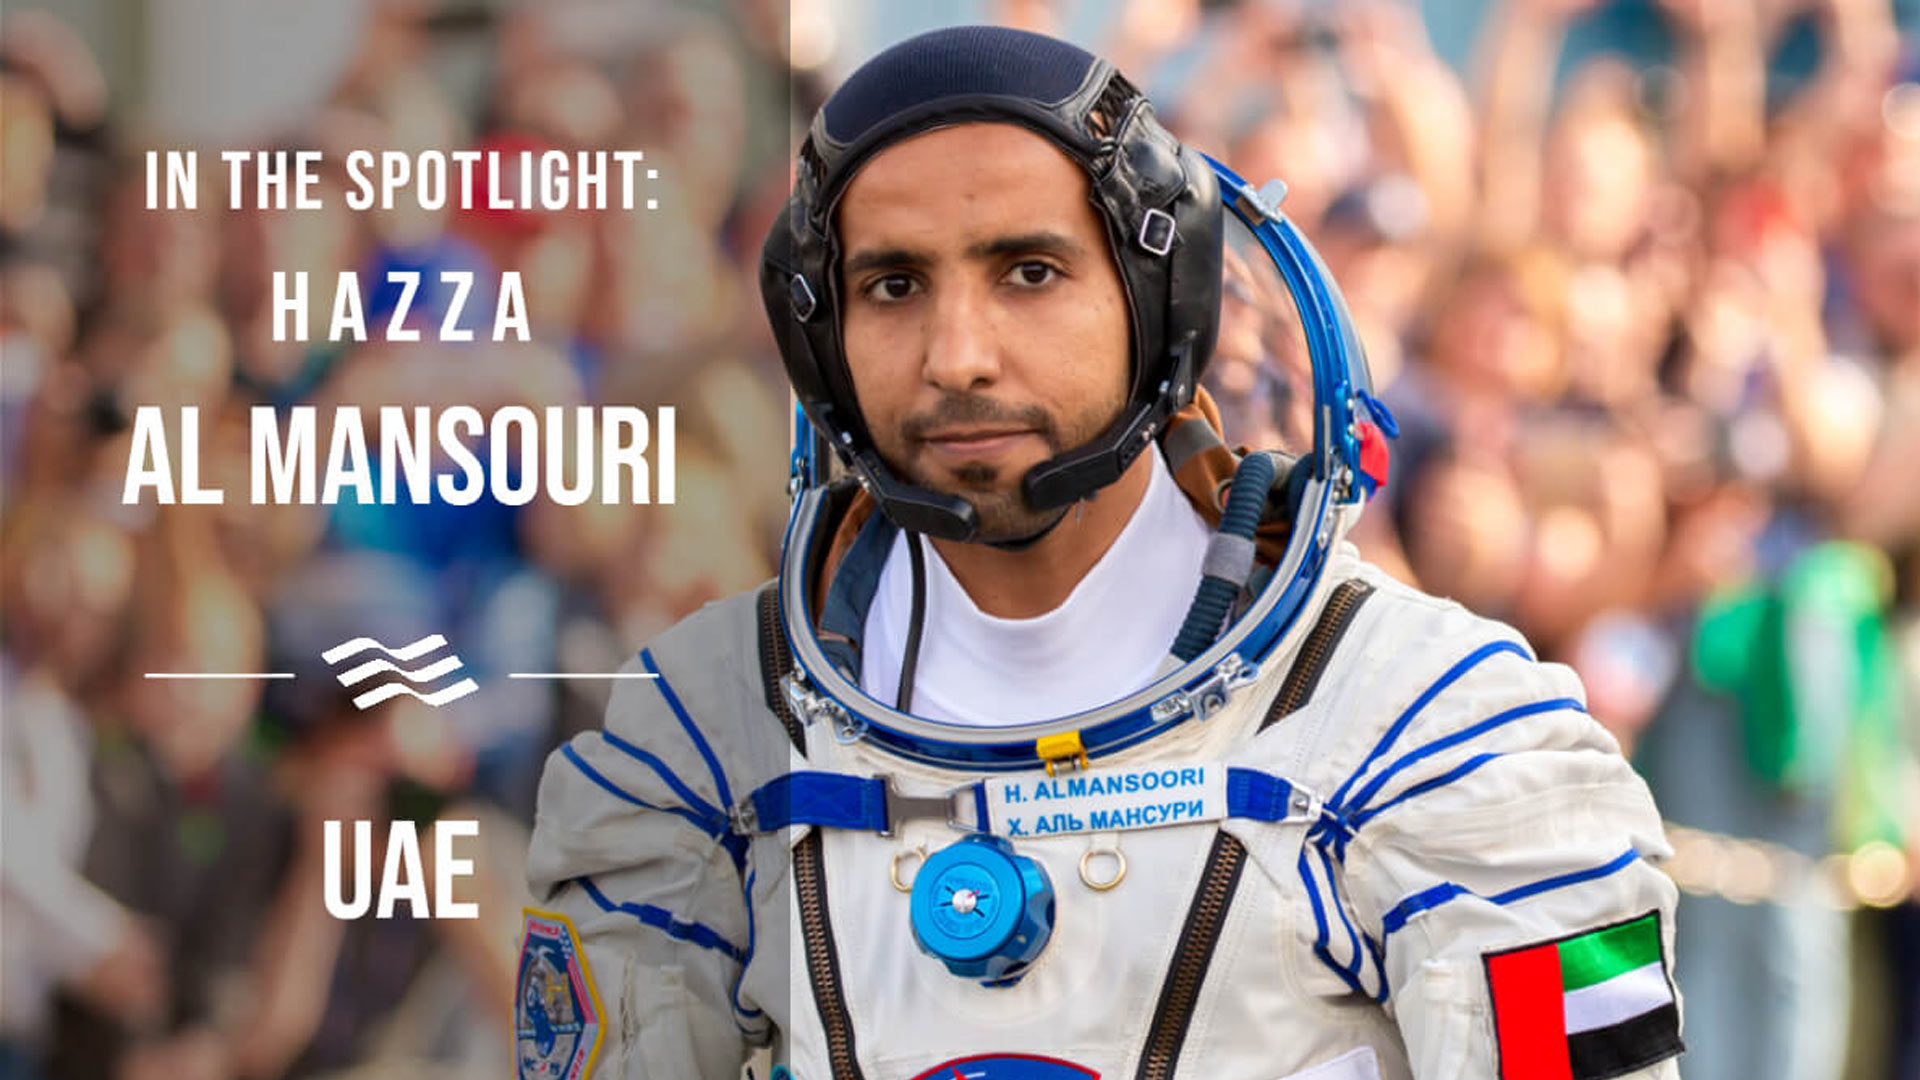 An image of Hazza Al Mansouri wearing a spacesuit with the writing saying In the Spotlight: Hazza Al Mansouri. UAE